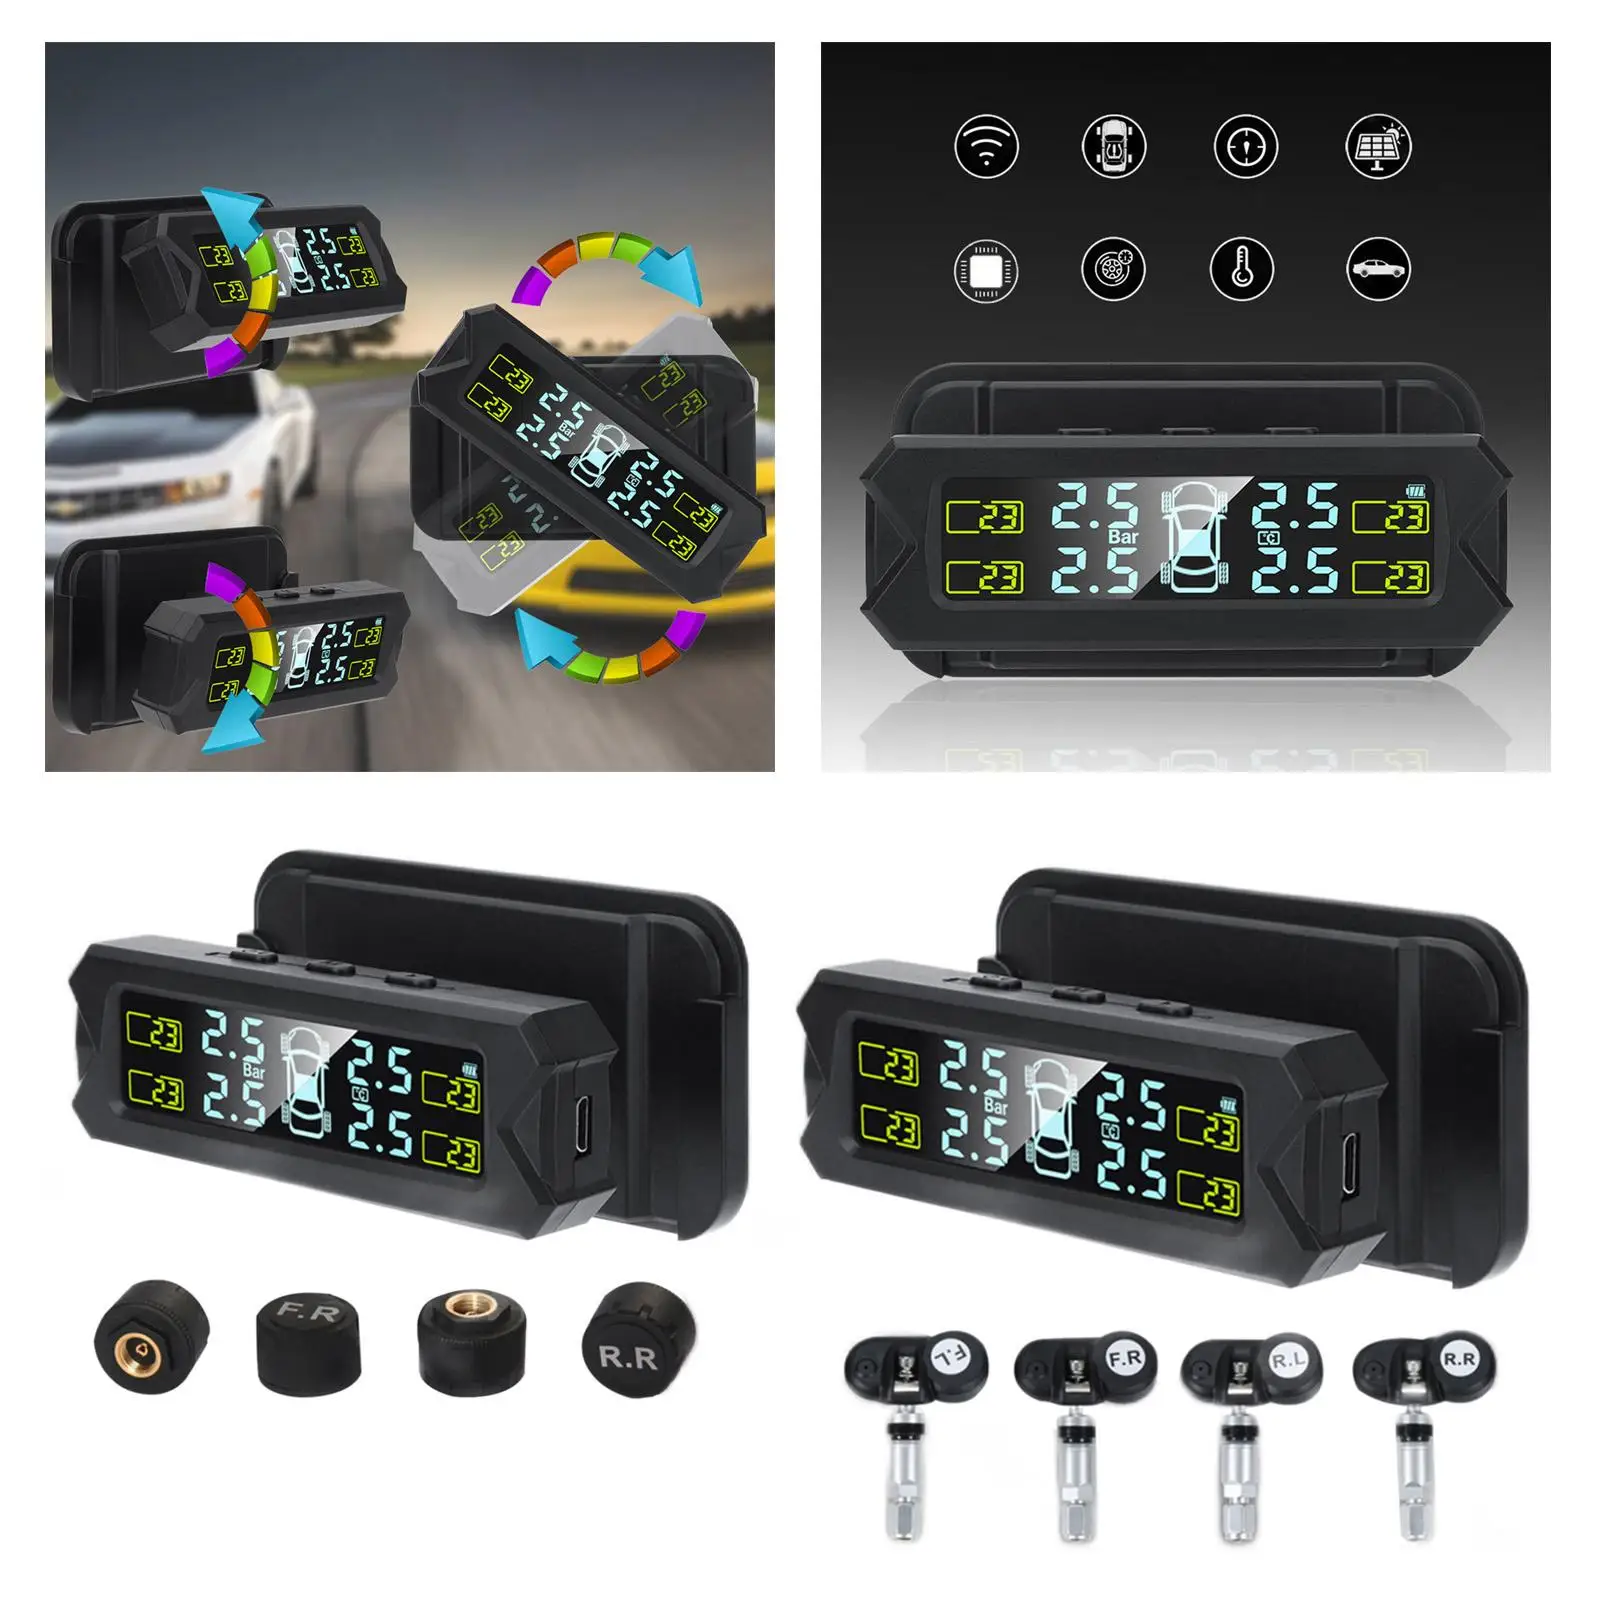 Automotive Car Solar Tmps Sensors 2 Charging Ways High Accuracy Real Time RV Truck TPMS LCD Digital Displaying for Drive Safety